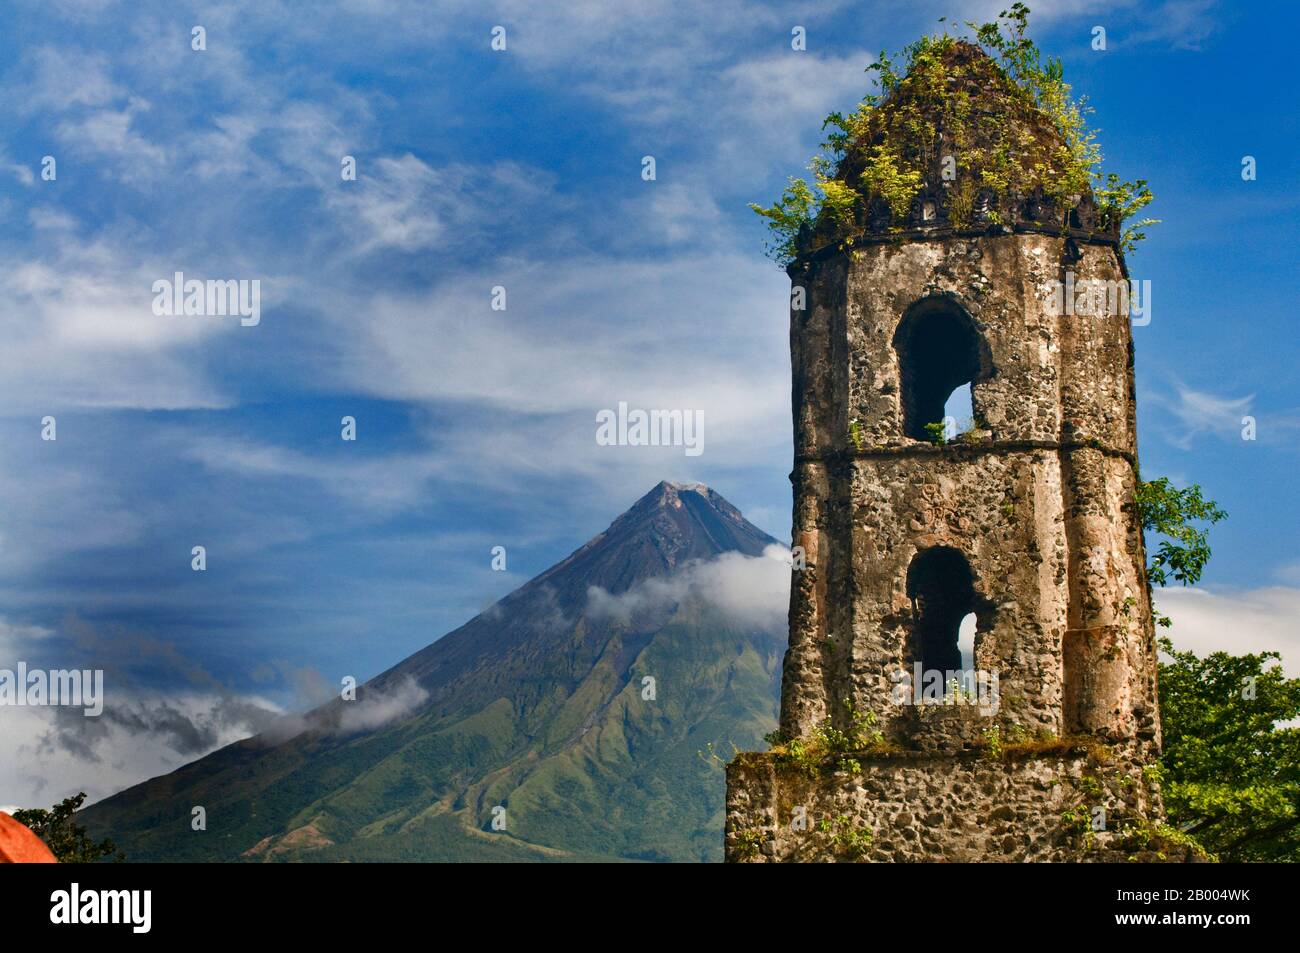 Mayon Volcano, renowned  for its perfect cone, is a popular tourist destination. The Cagsawa ruins are remnants of a 16th century Franciscan church. Stock Photo